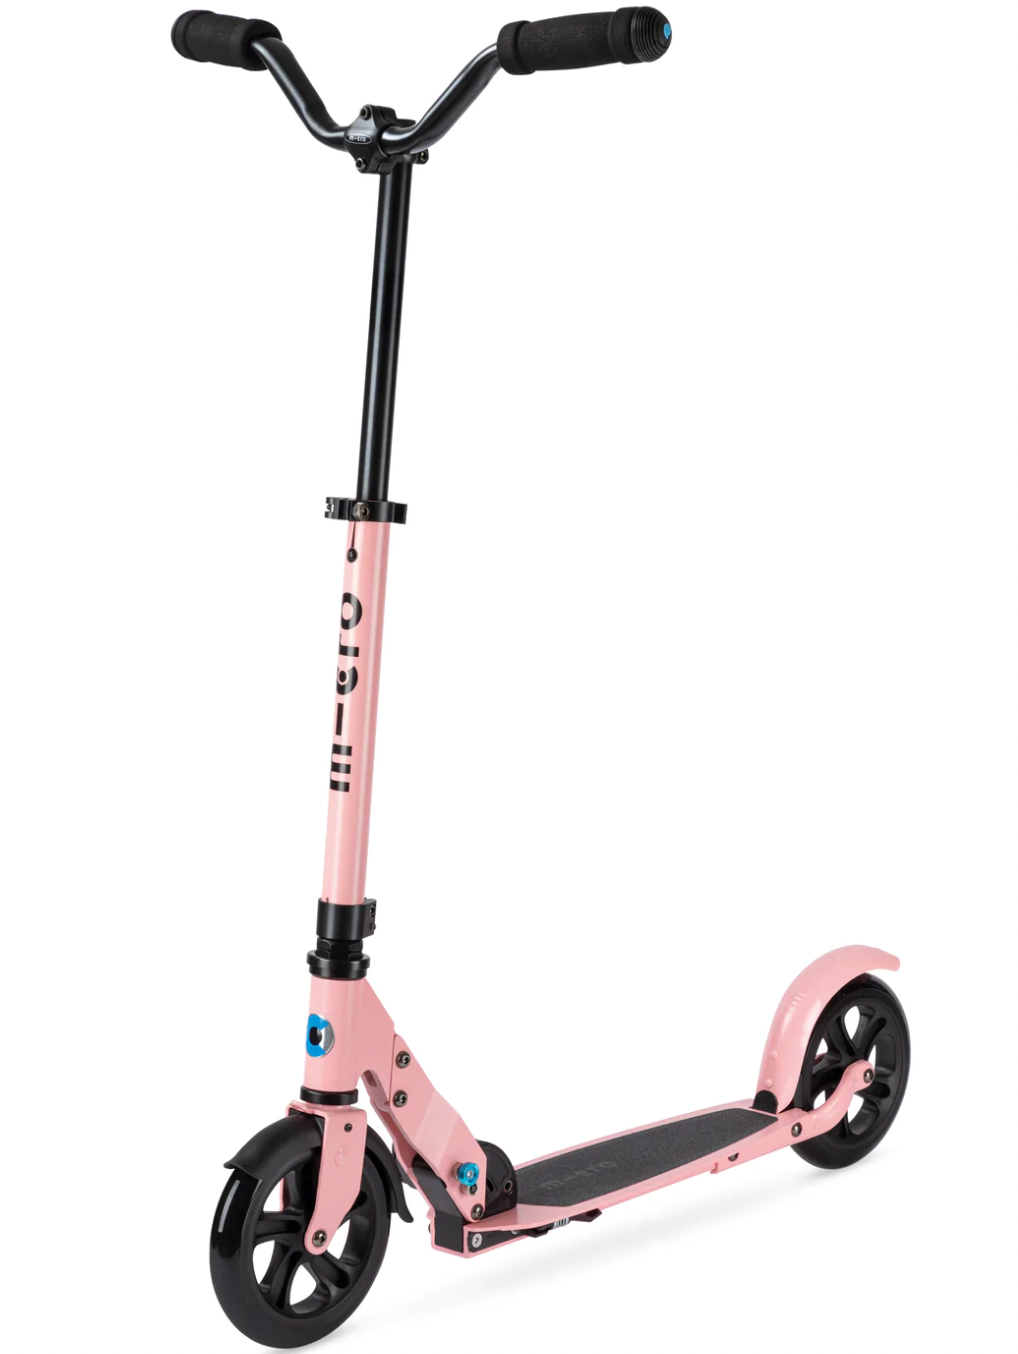 Speed Deluxe scooter